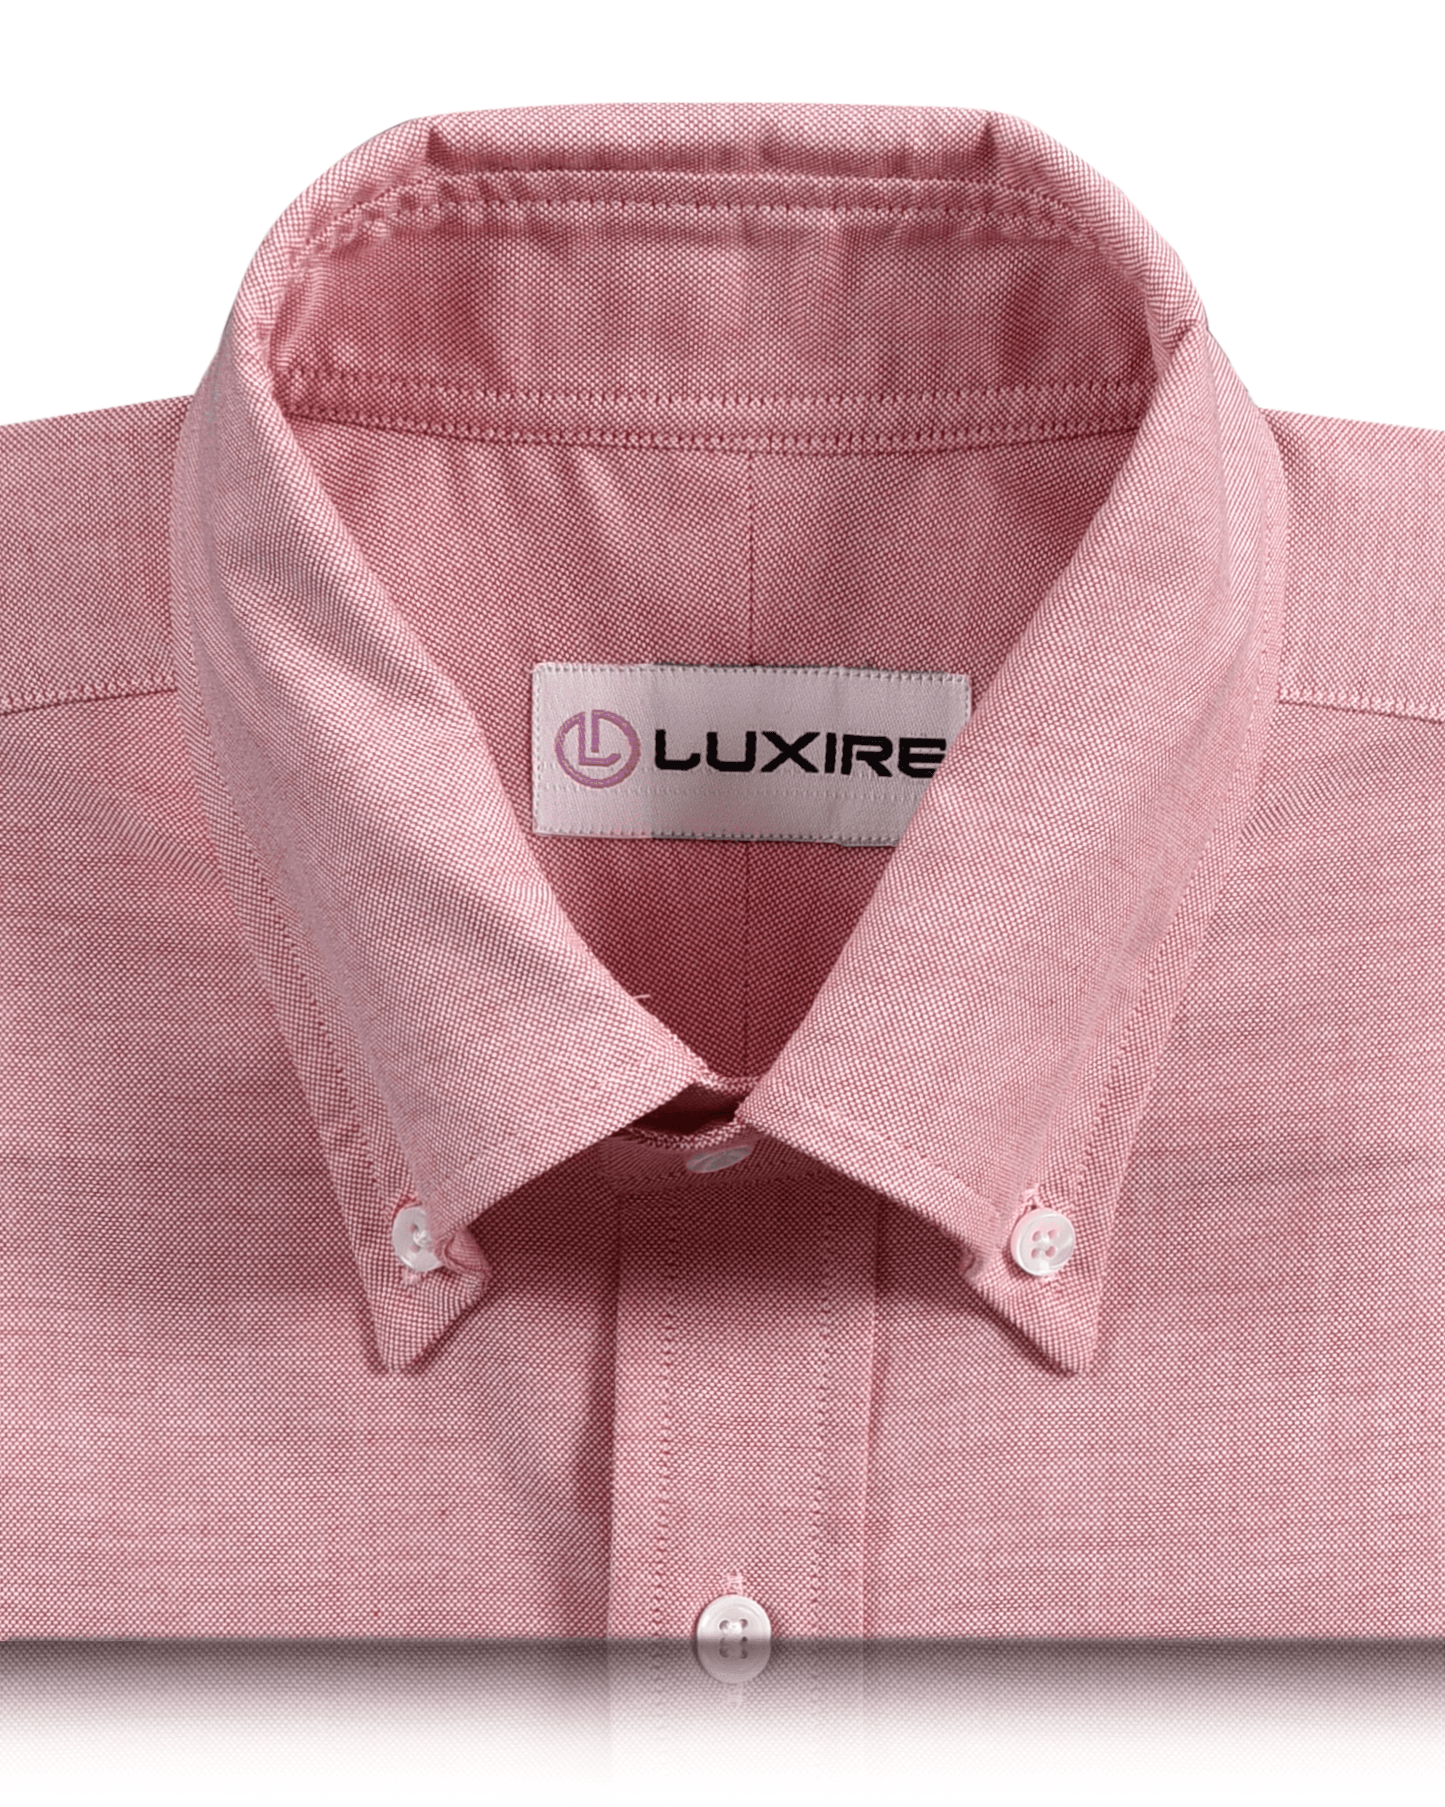 Collar of the custom oxford shirt for men by Luxire in classic red